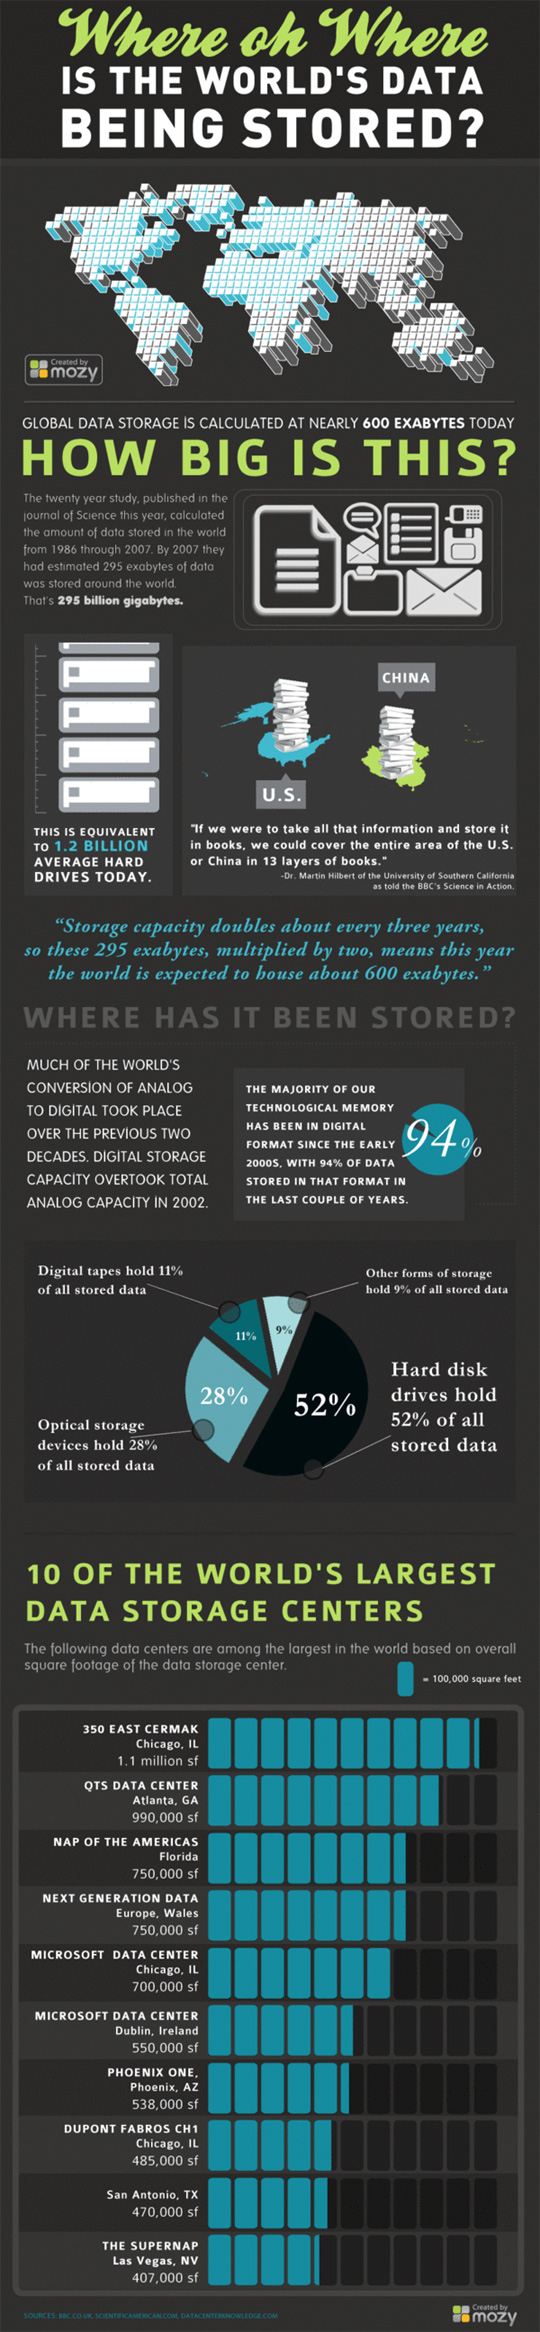 Where Oh Where: Current State Of World's Data Storage (Infographic) 11